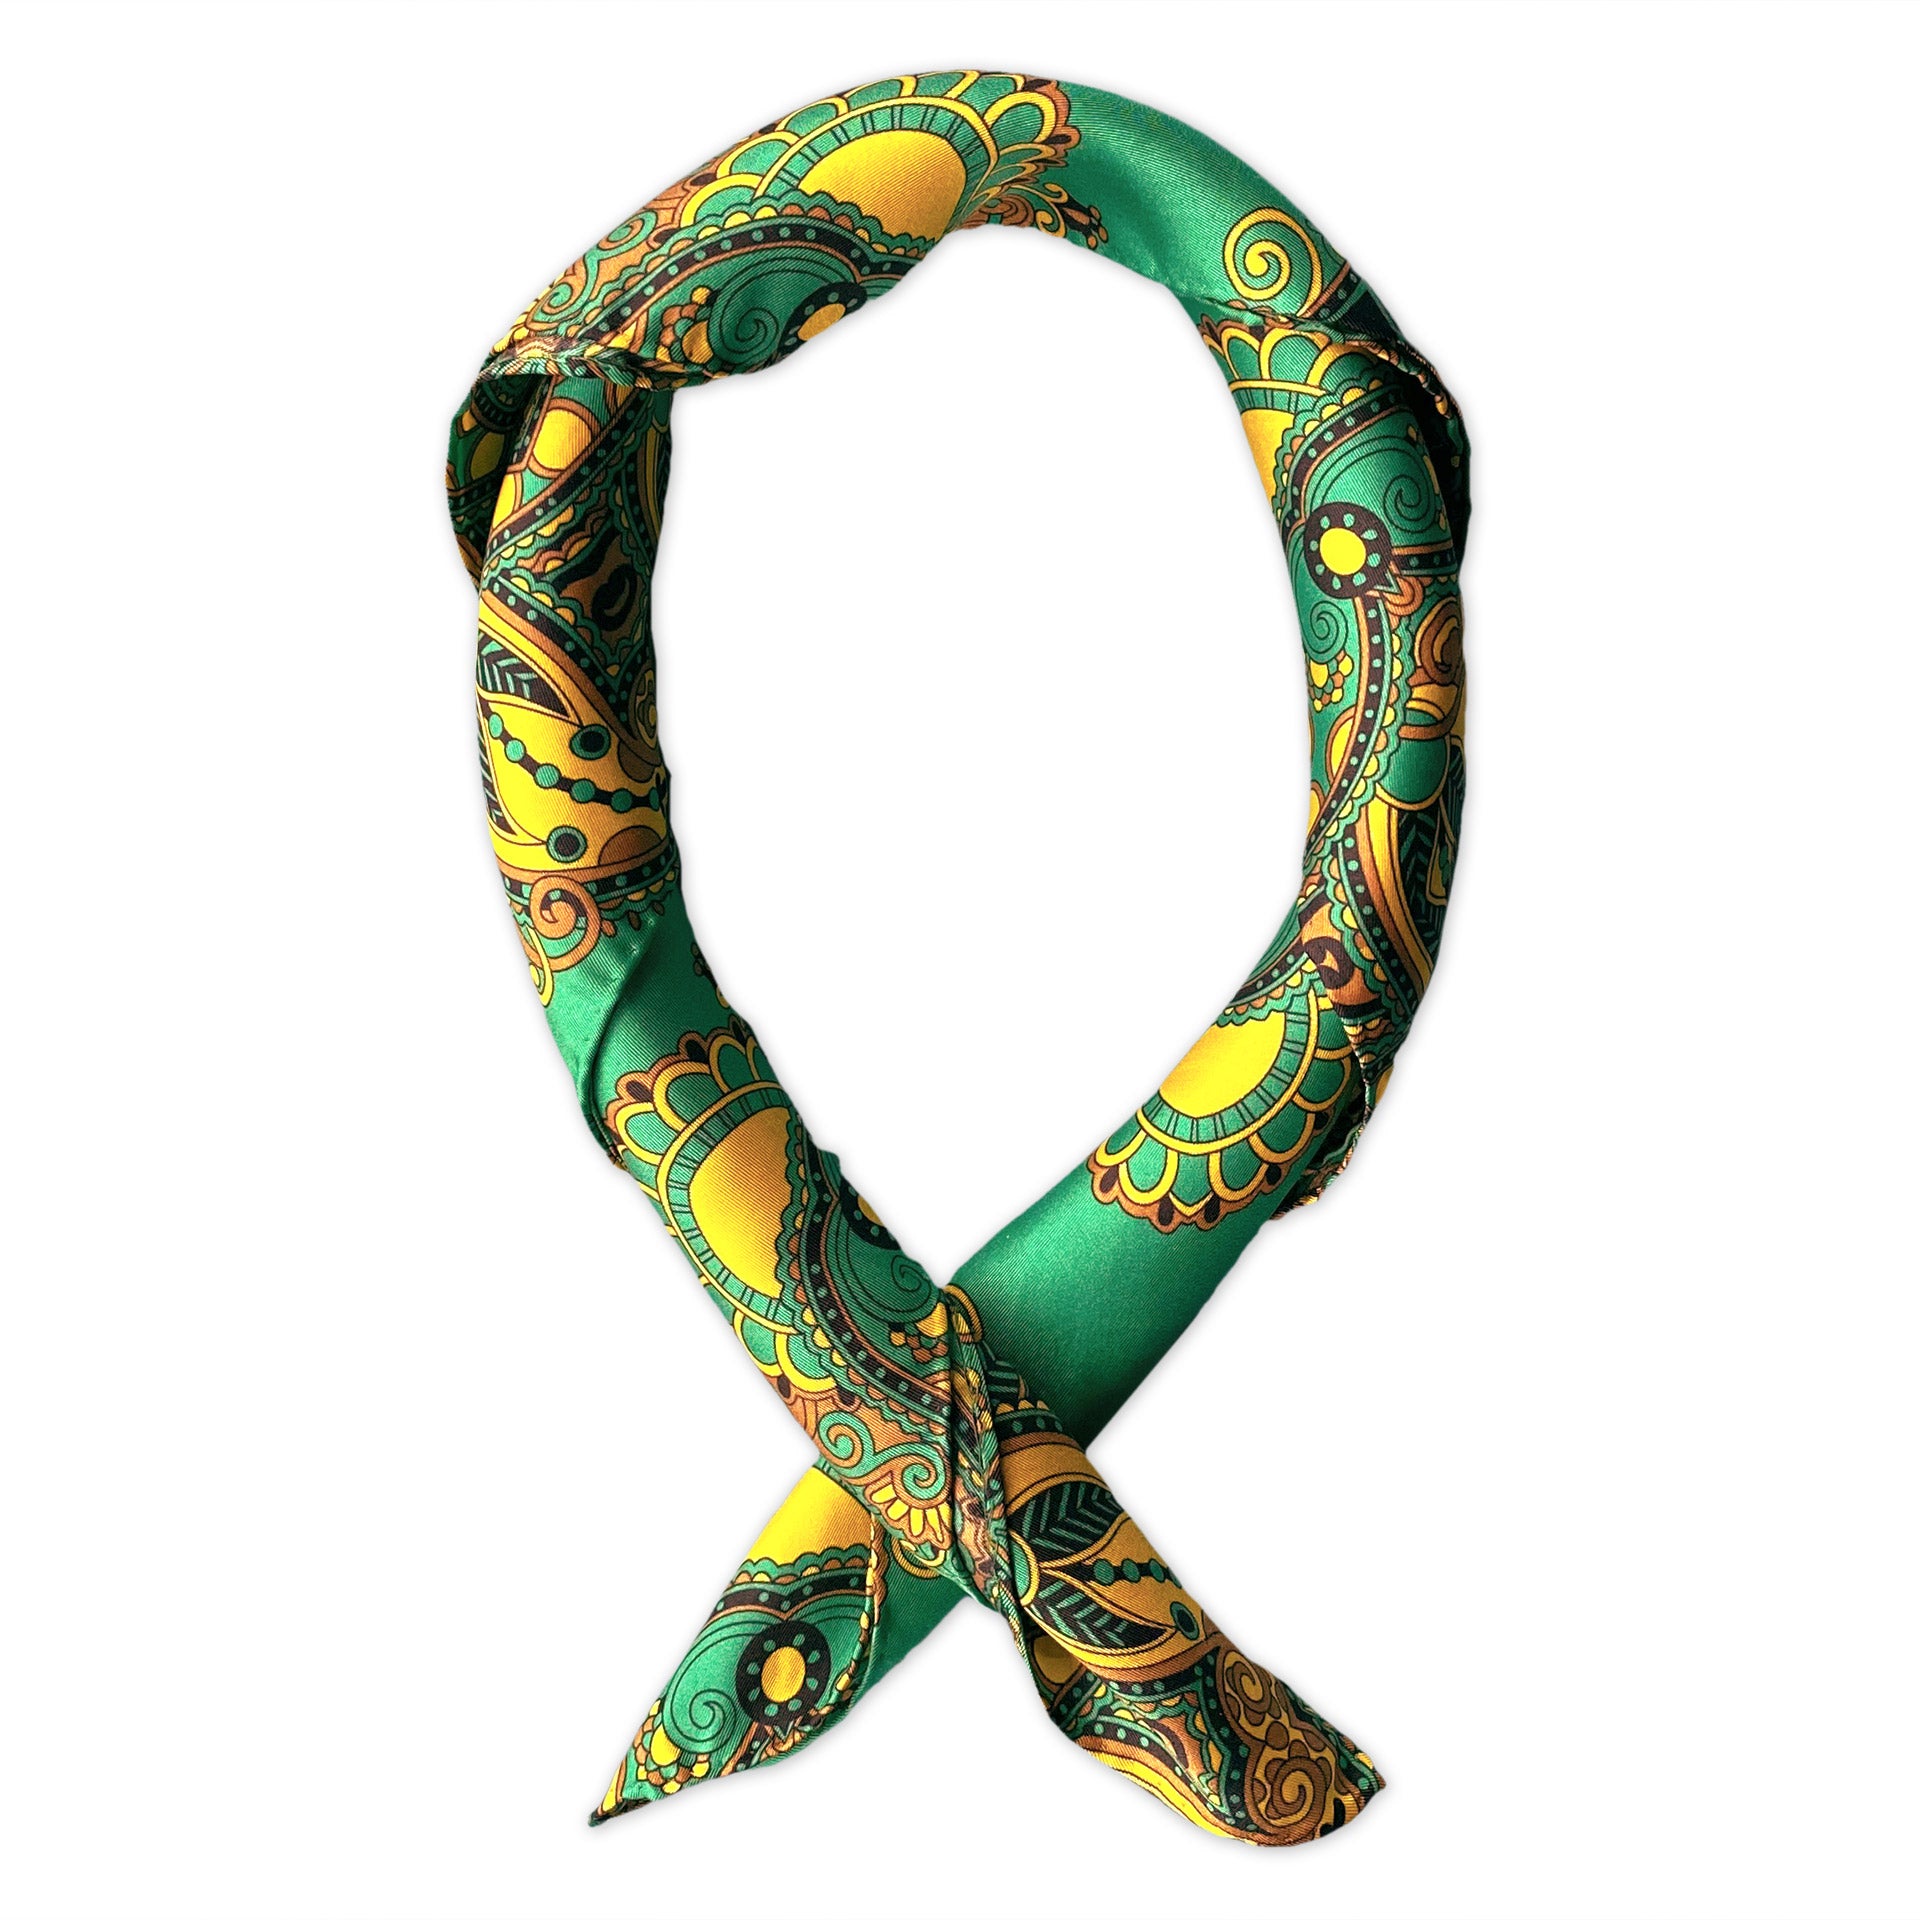 Square scarf rolled into a loop, showing the sheen of the silk neckerchief fabric with gold and black Fleur de Lis patterns on a green ground.